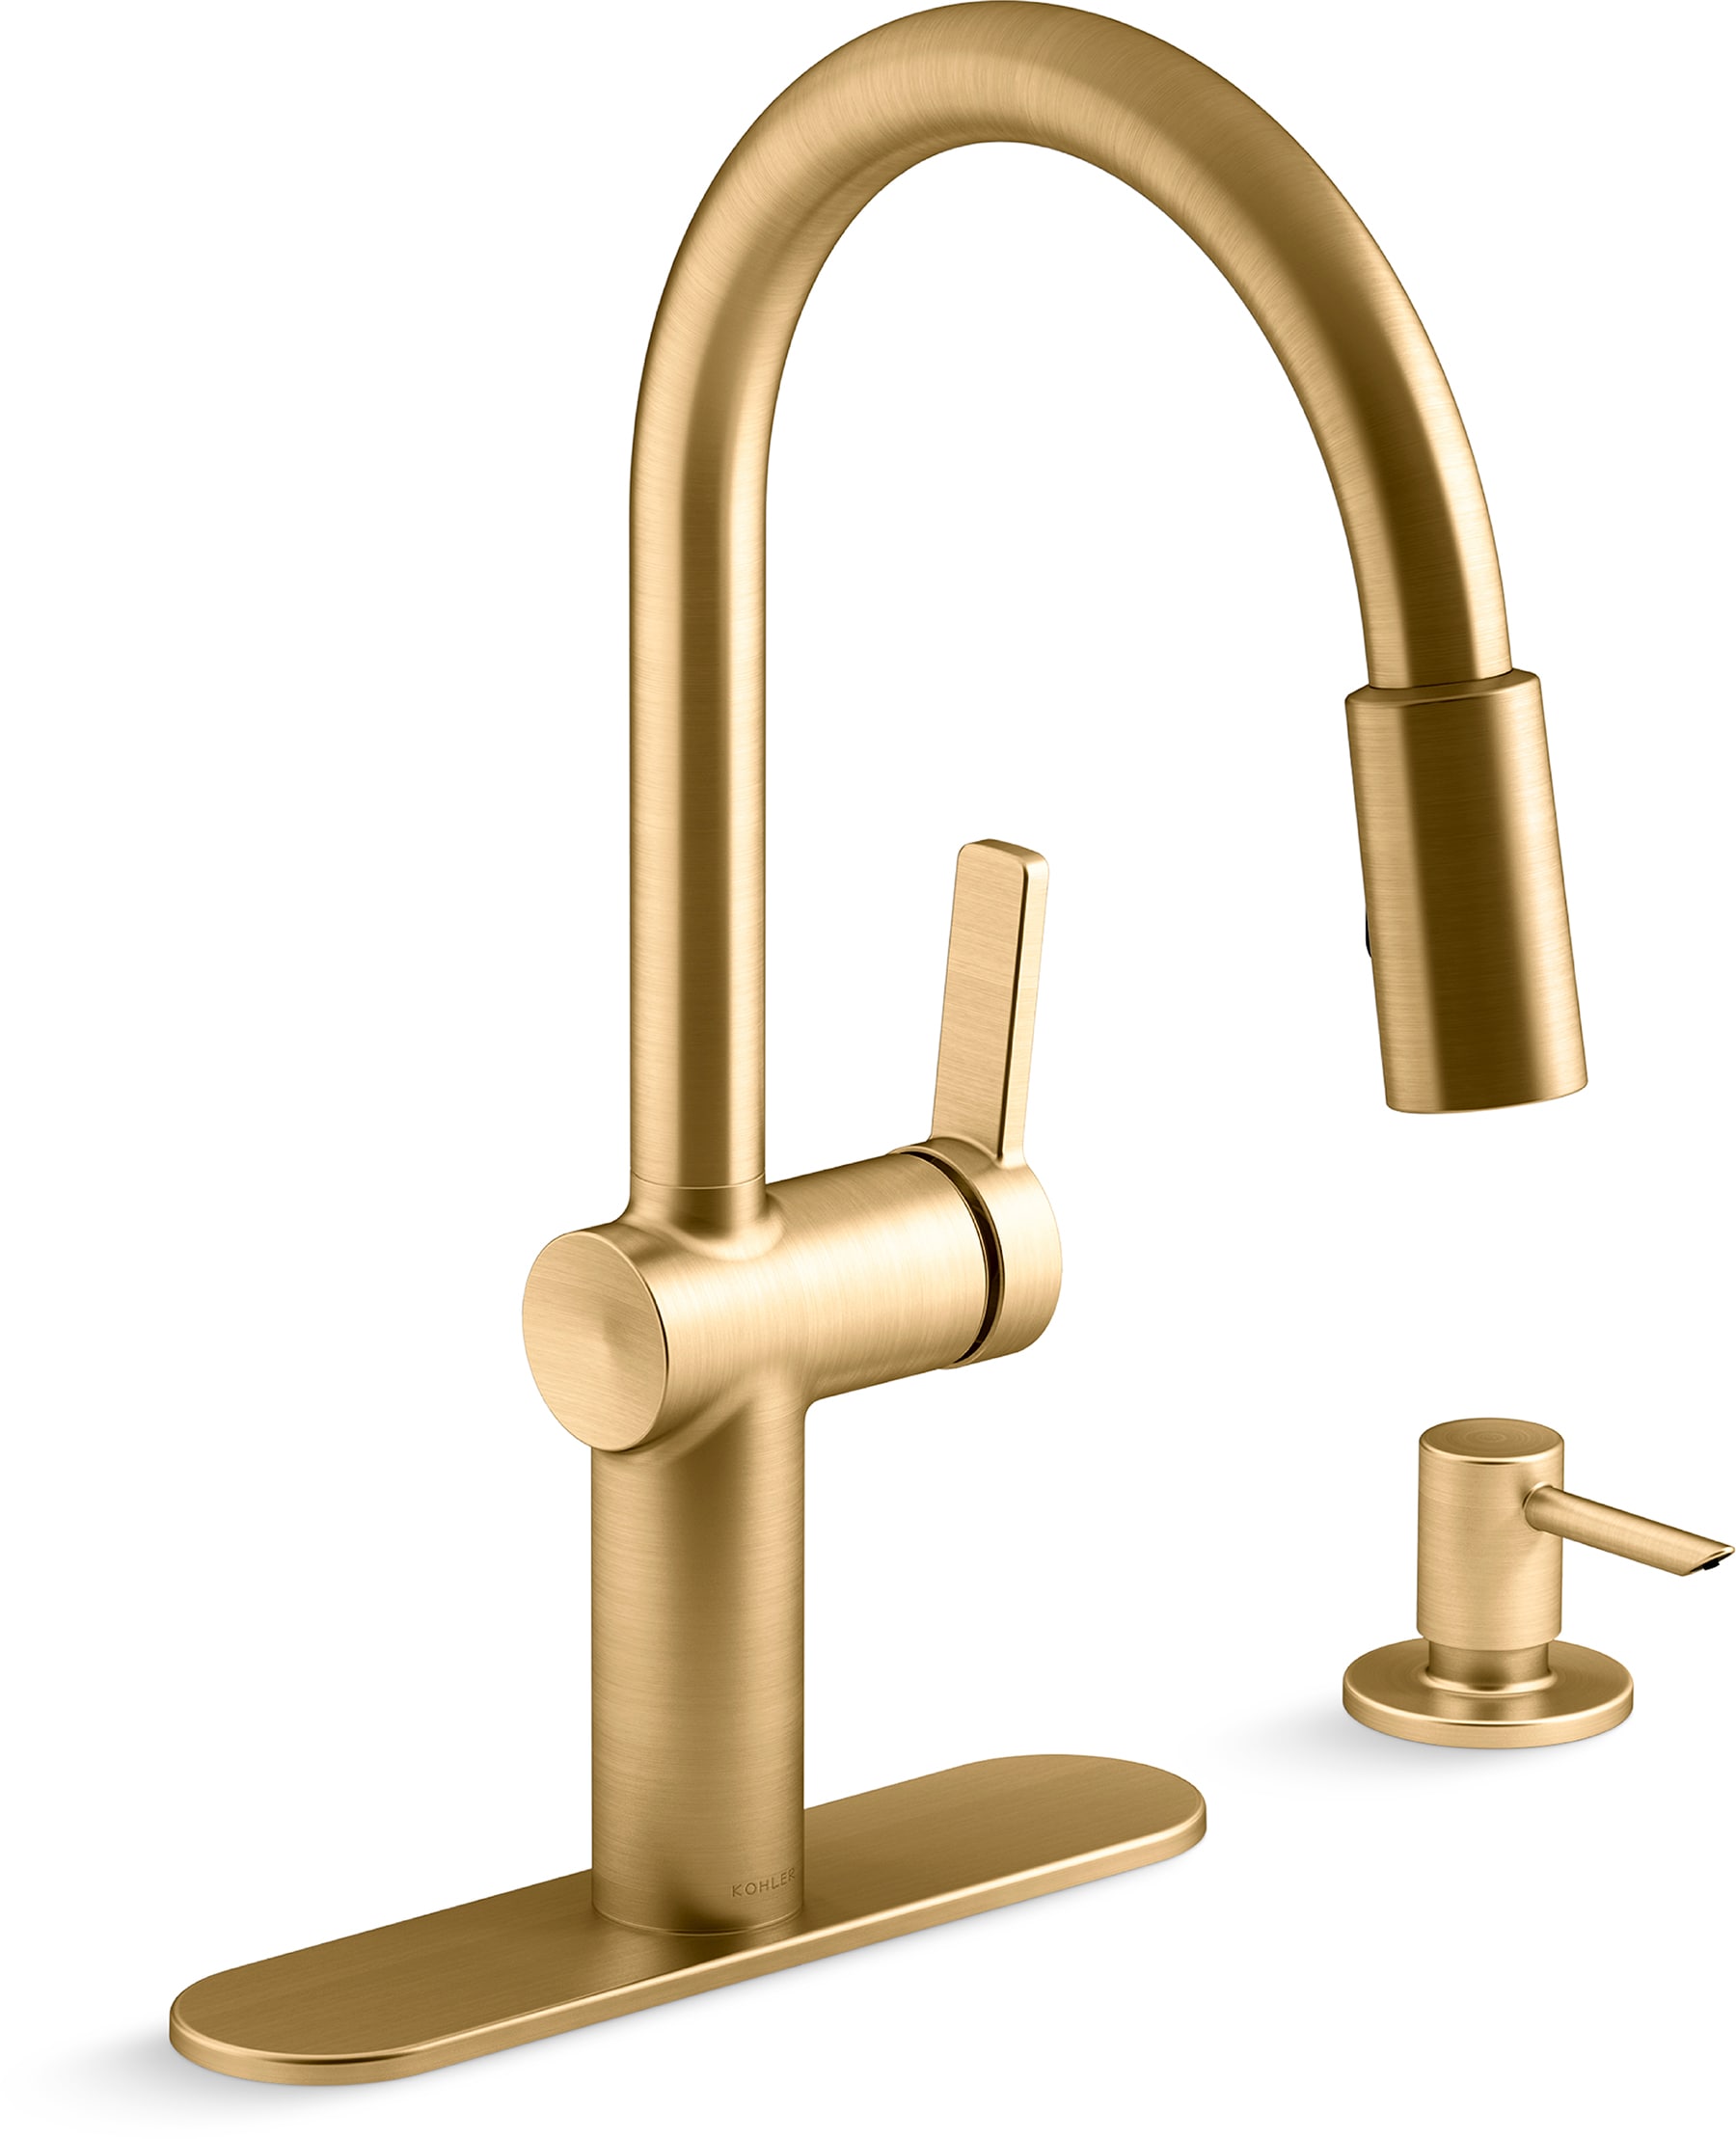 KOHLER Koi Vibrant Brushed Moderne Brass Single Handle Pull-down Kitchen  Faucet with Deck Plate and Soap Dispenser Included